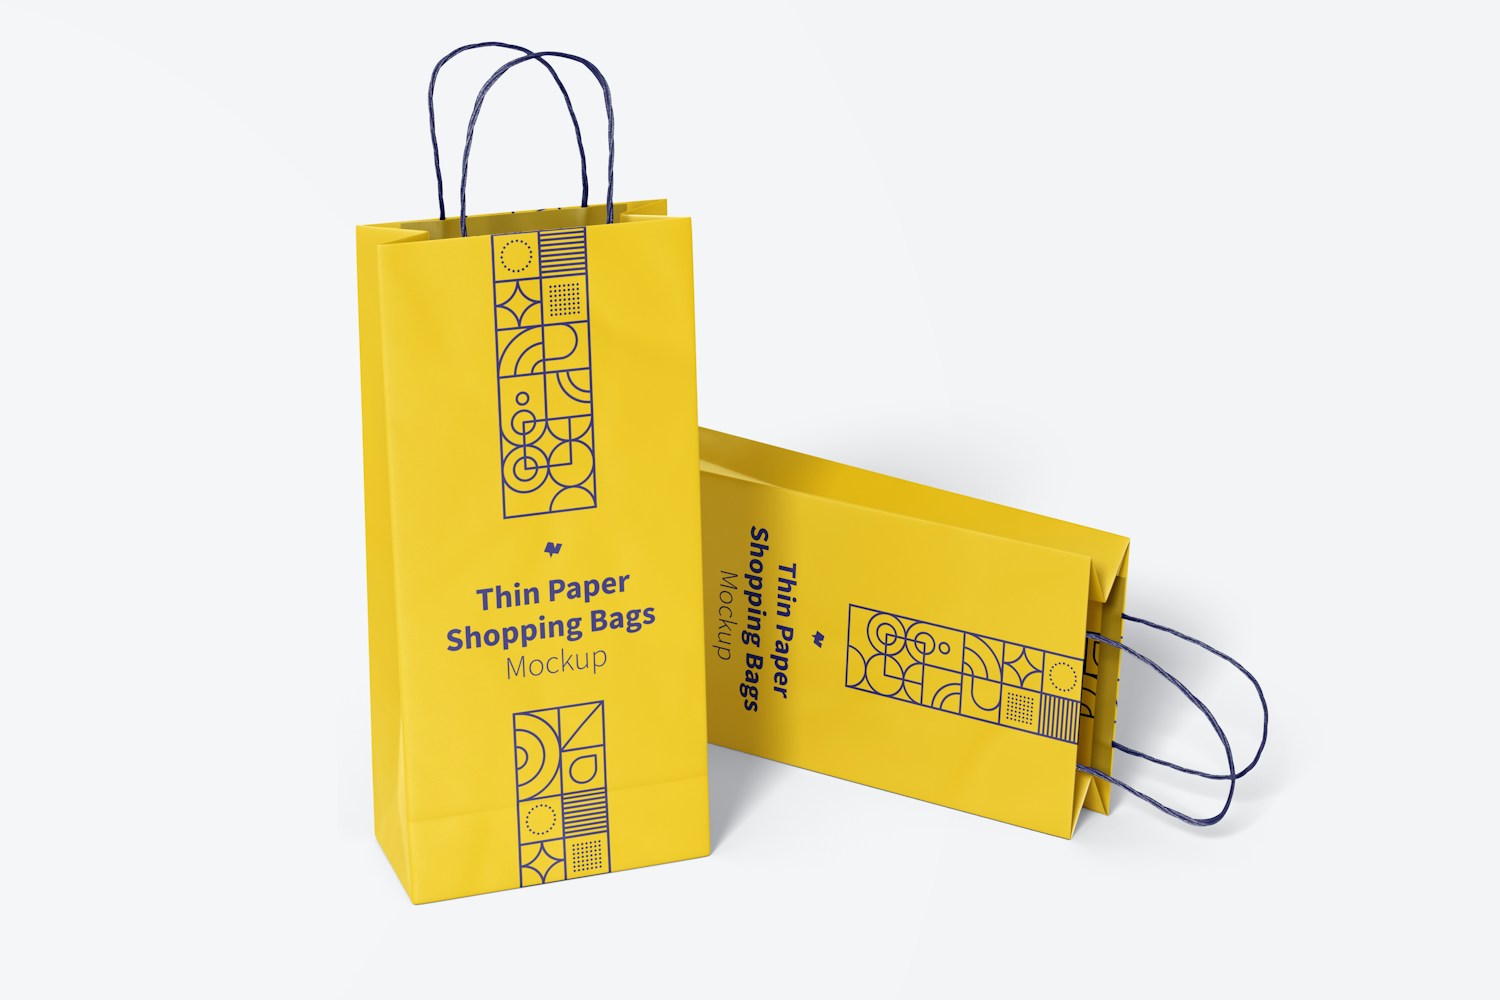 Thin Paper Shopping Bags Mockup, Perspective